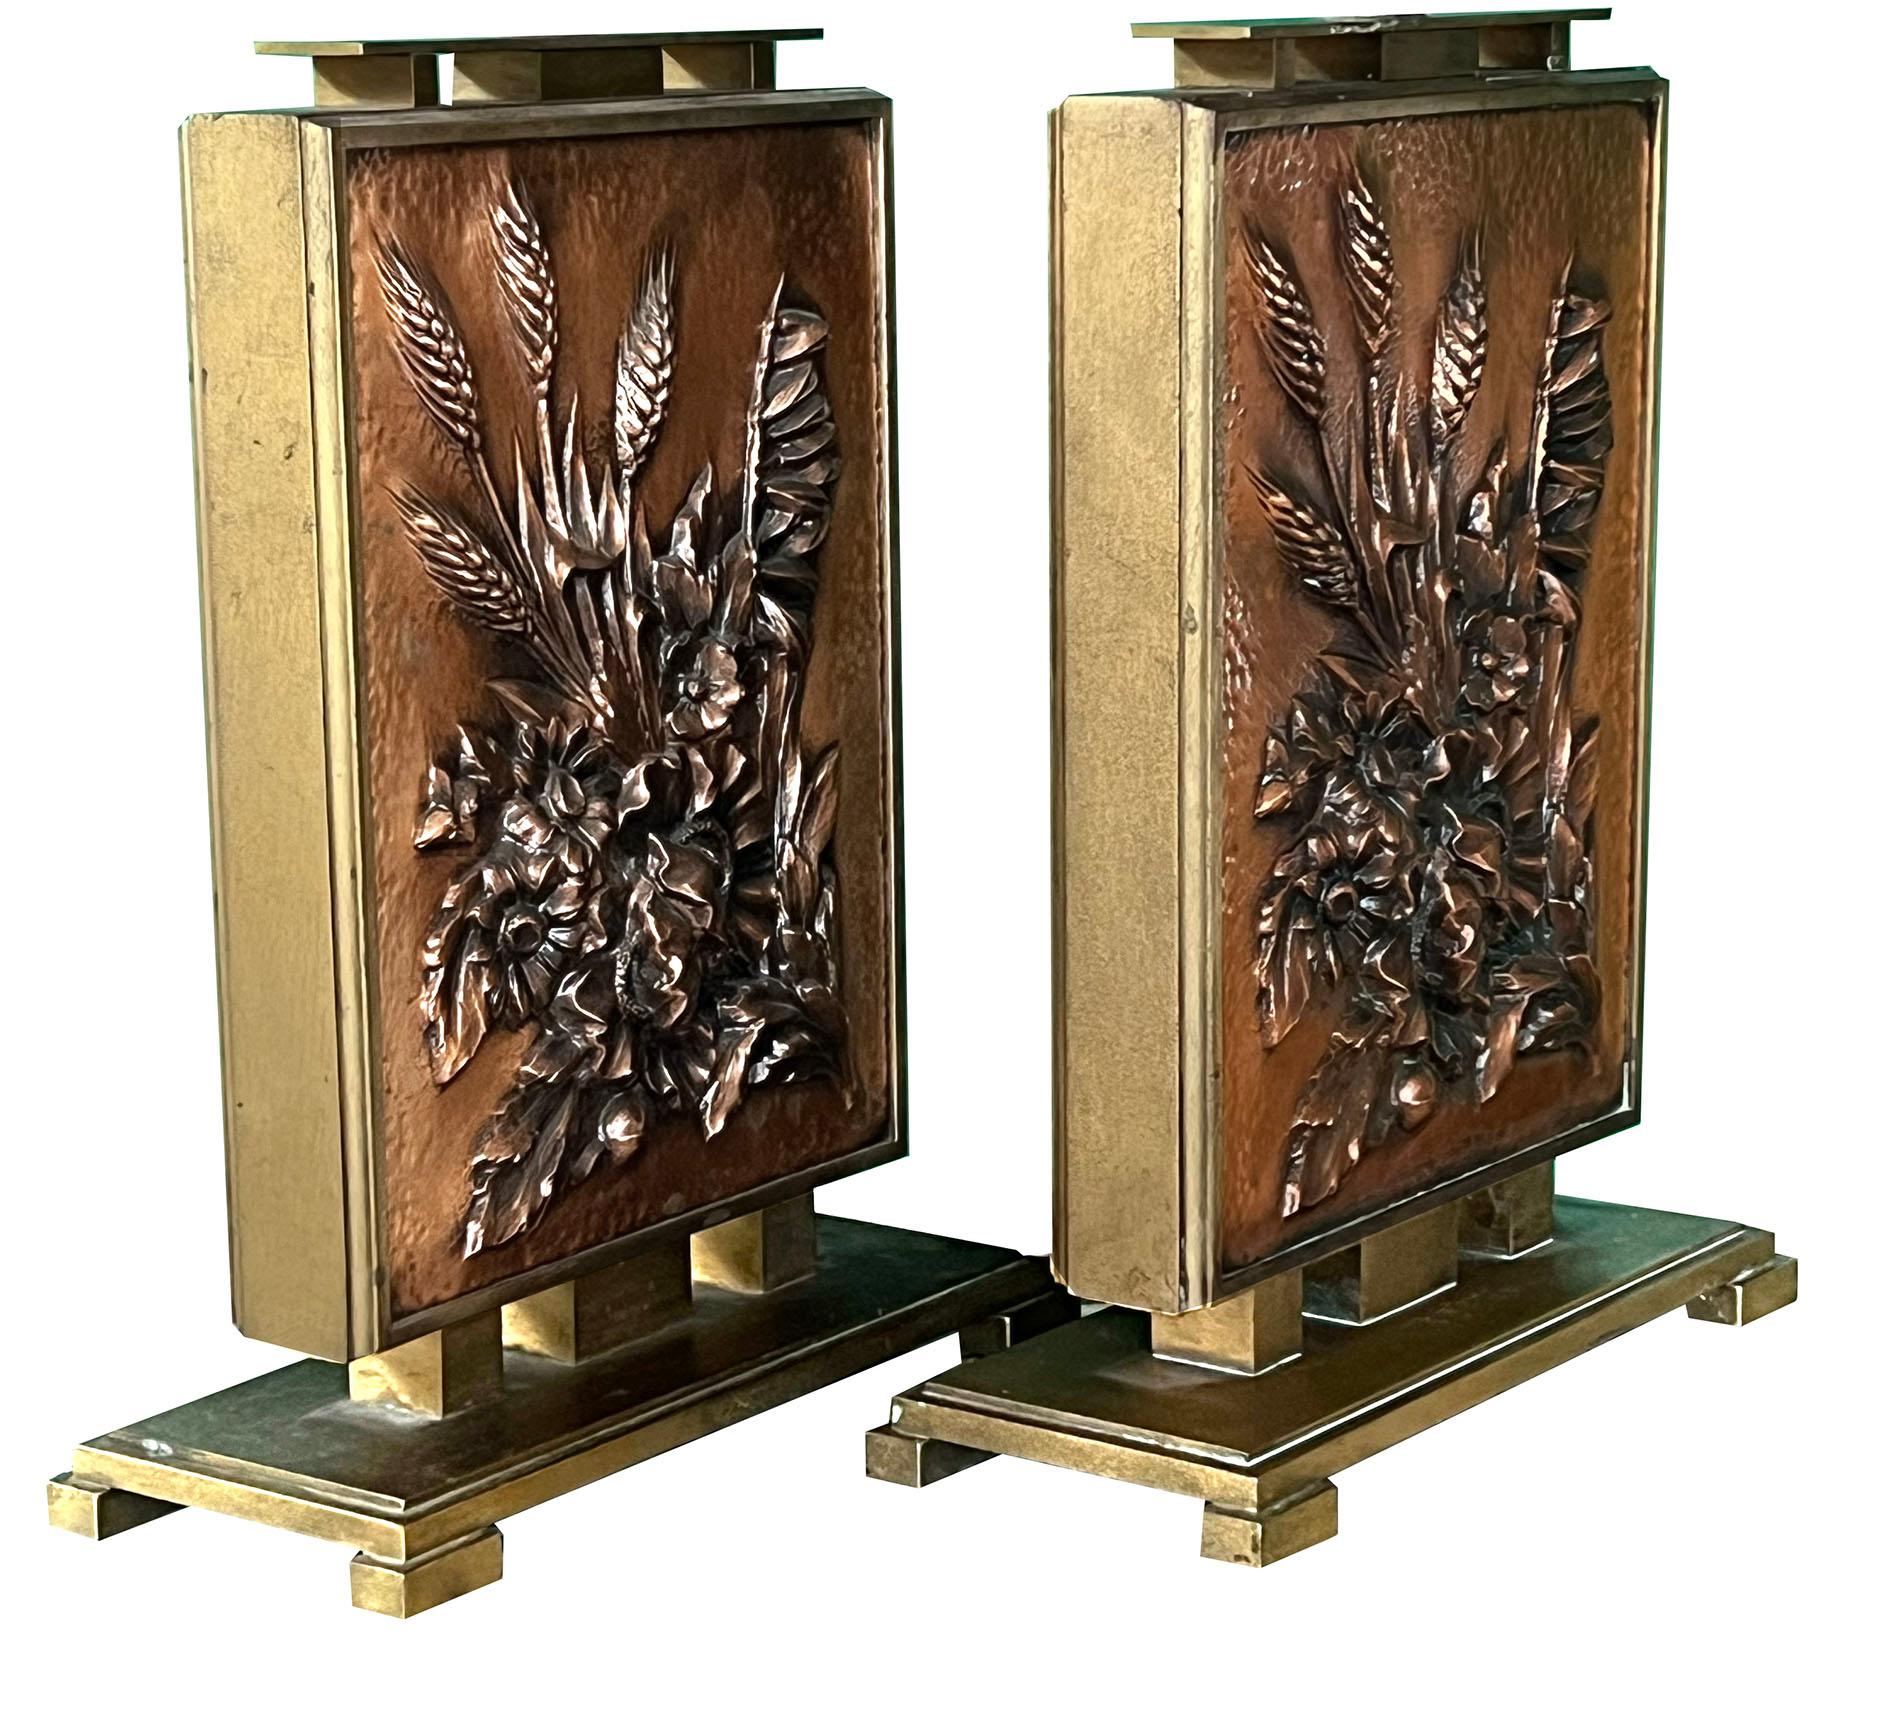 each with exceptional copper repoussé plates depicting a finely-detailed bouquet of flowers, foliage and wheat sheaths (repeated on the back) all within a heavy bronze frame over a stepped plinth; Albert Louis Gilles was born in August of 1895 in